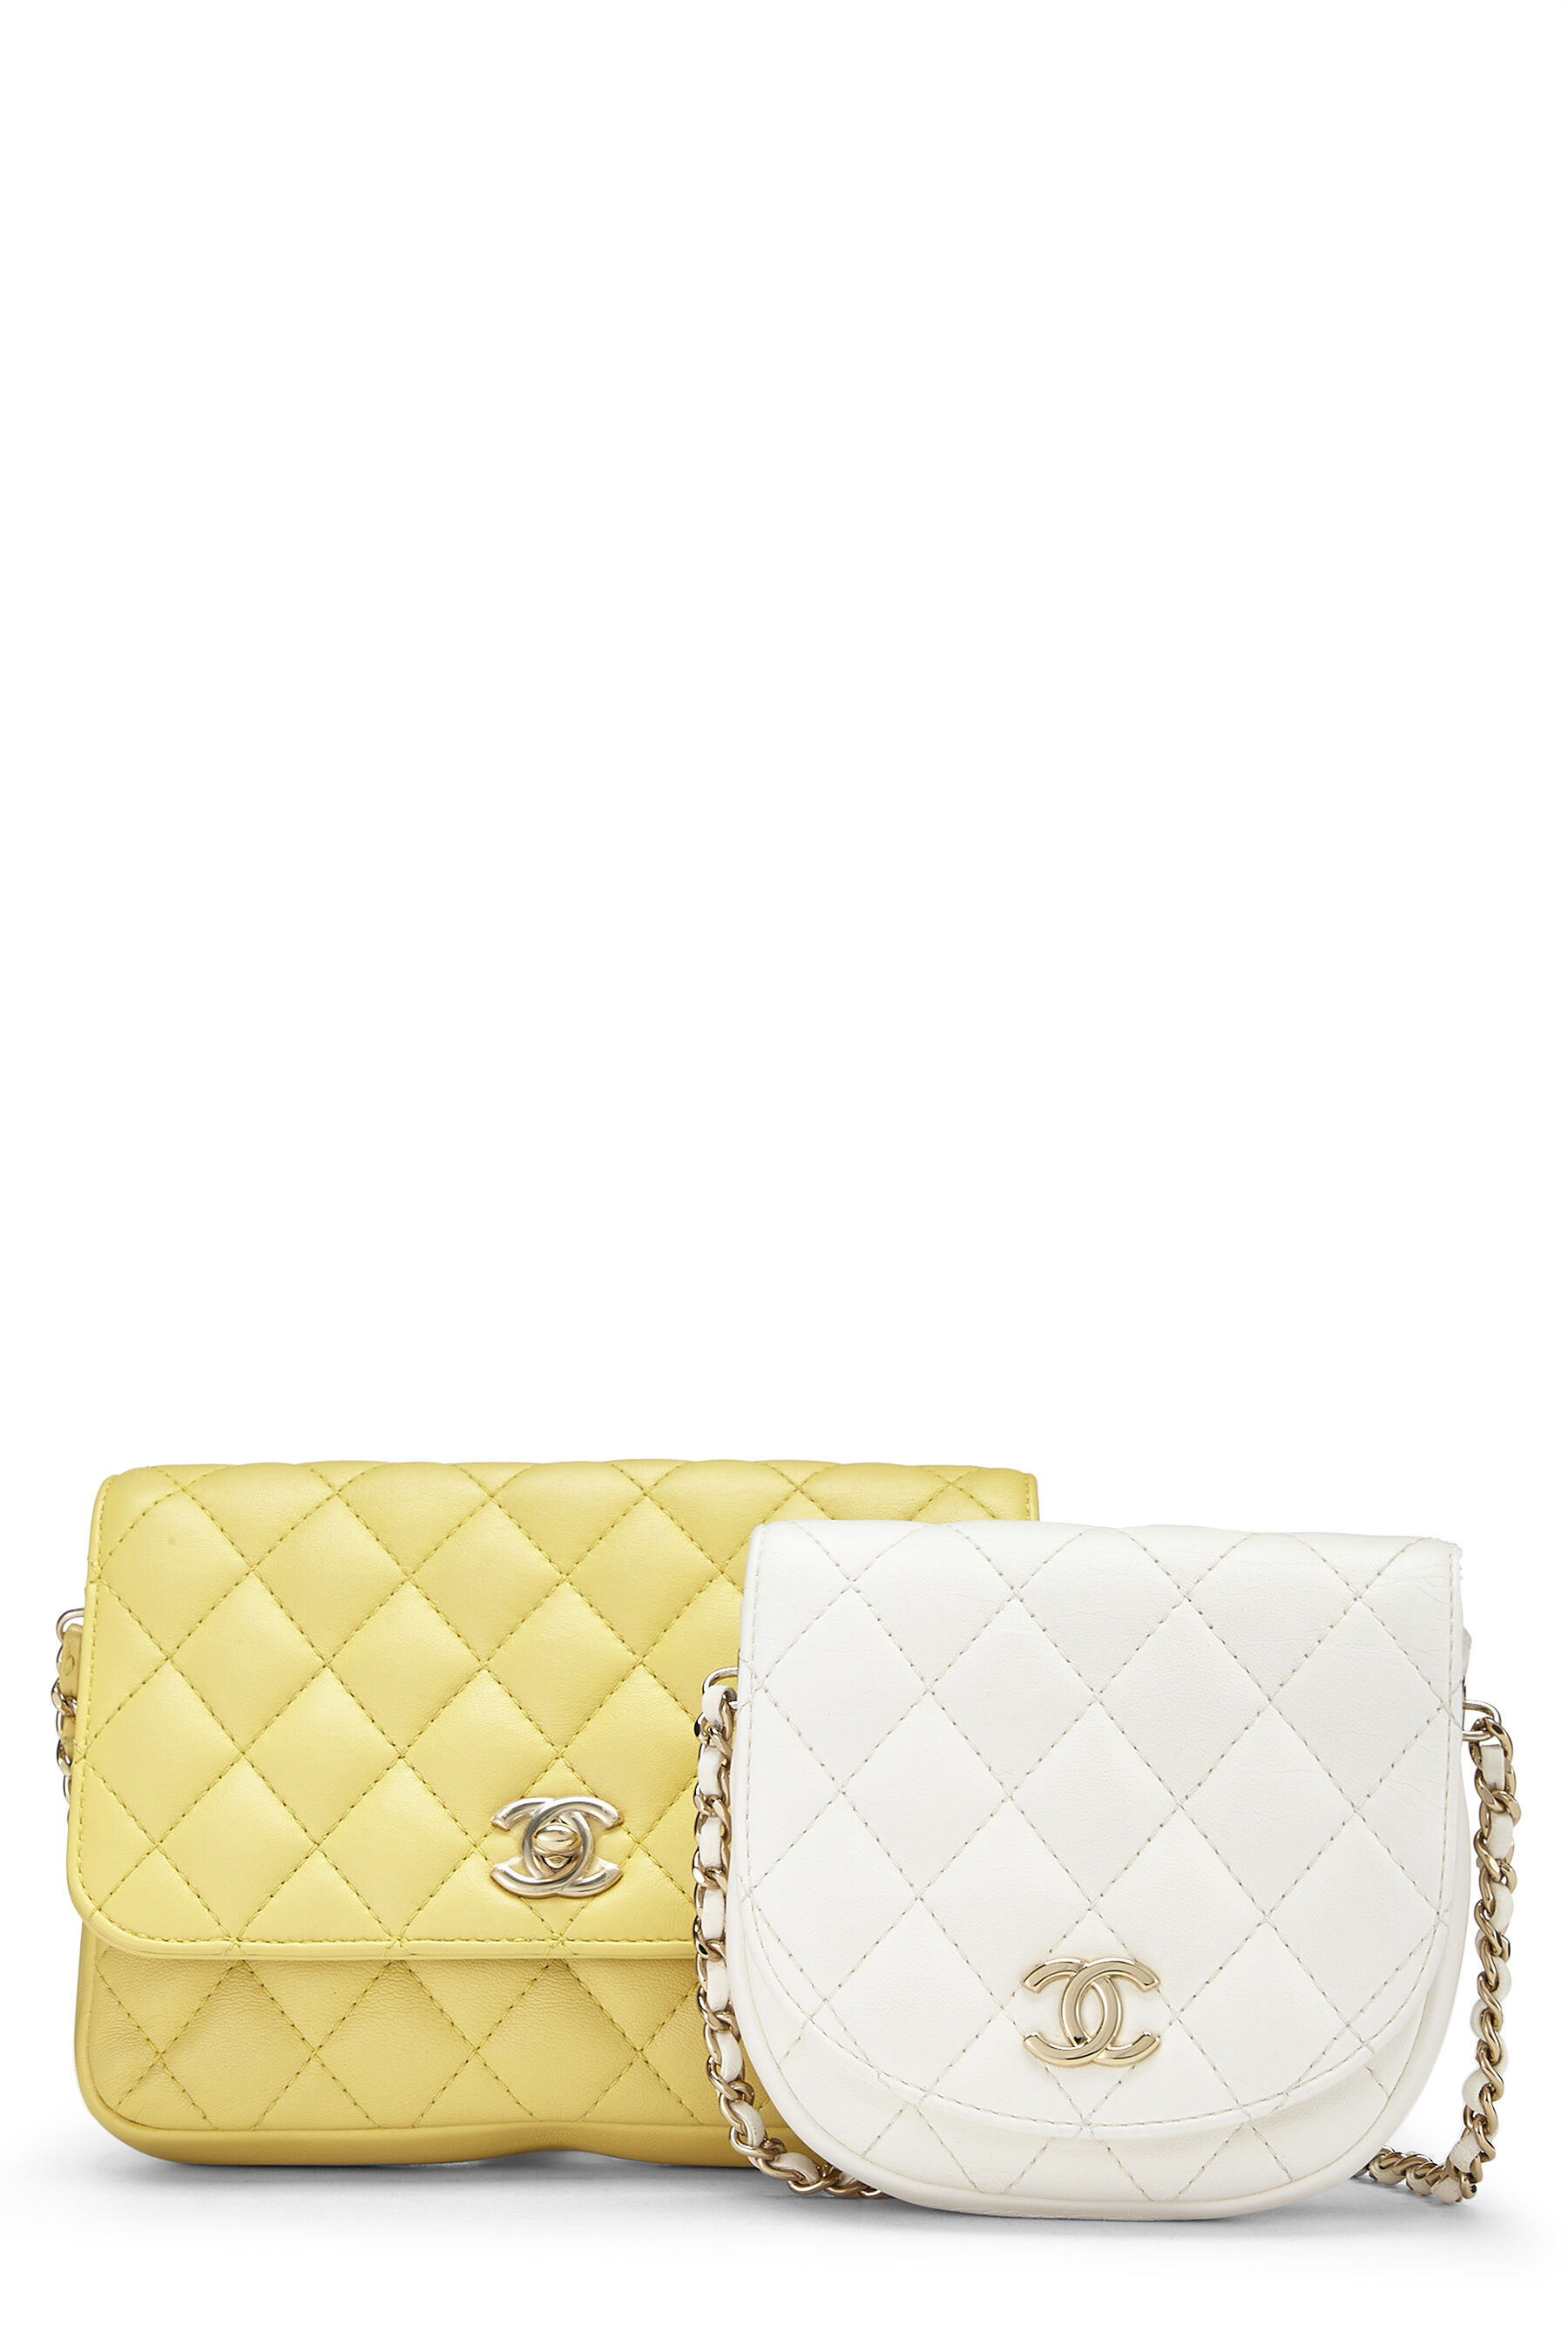 Chanel Yellow & White Quilted Lambskin Side Packs Bag Q6B4E21IMB000